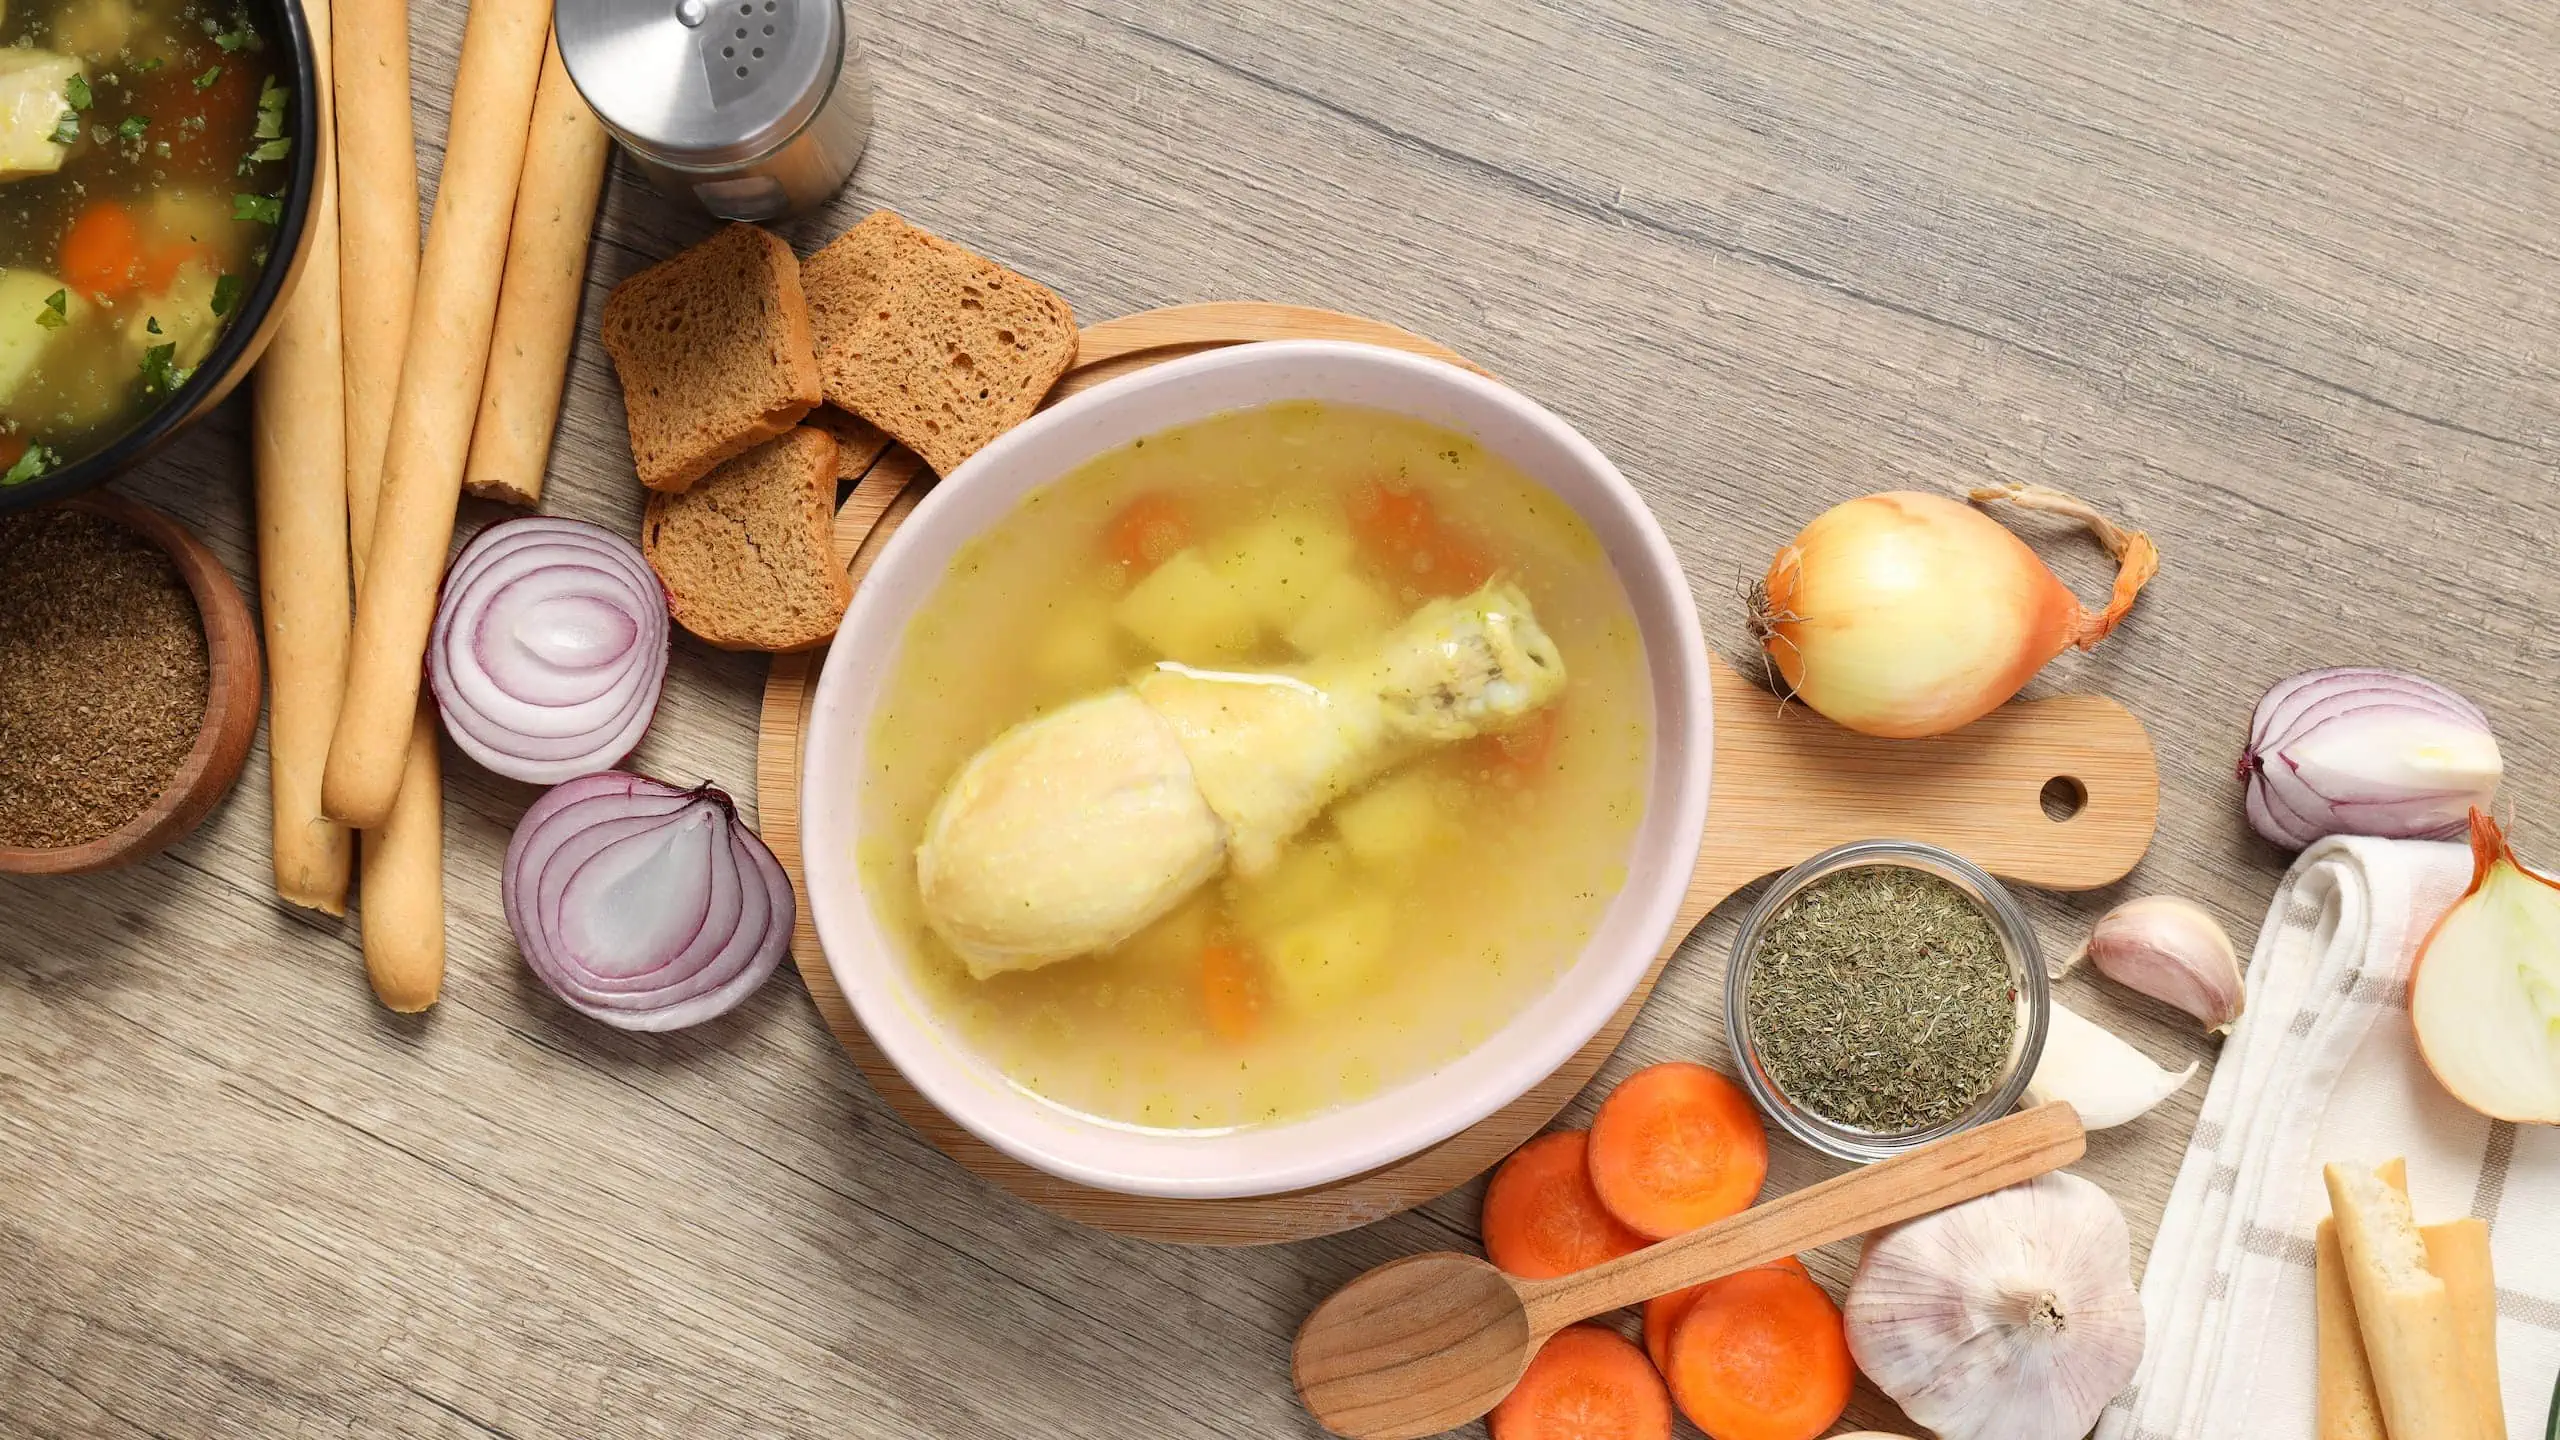 Our delicious chicken souse recipe